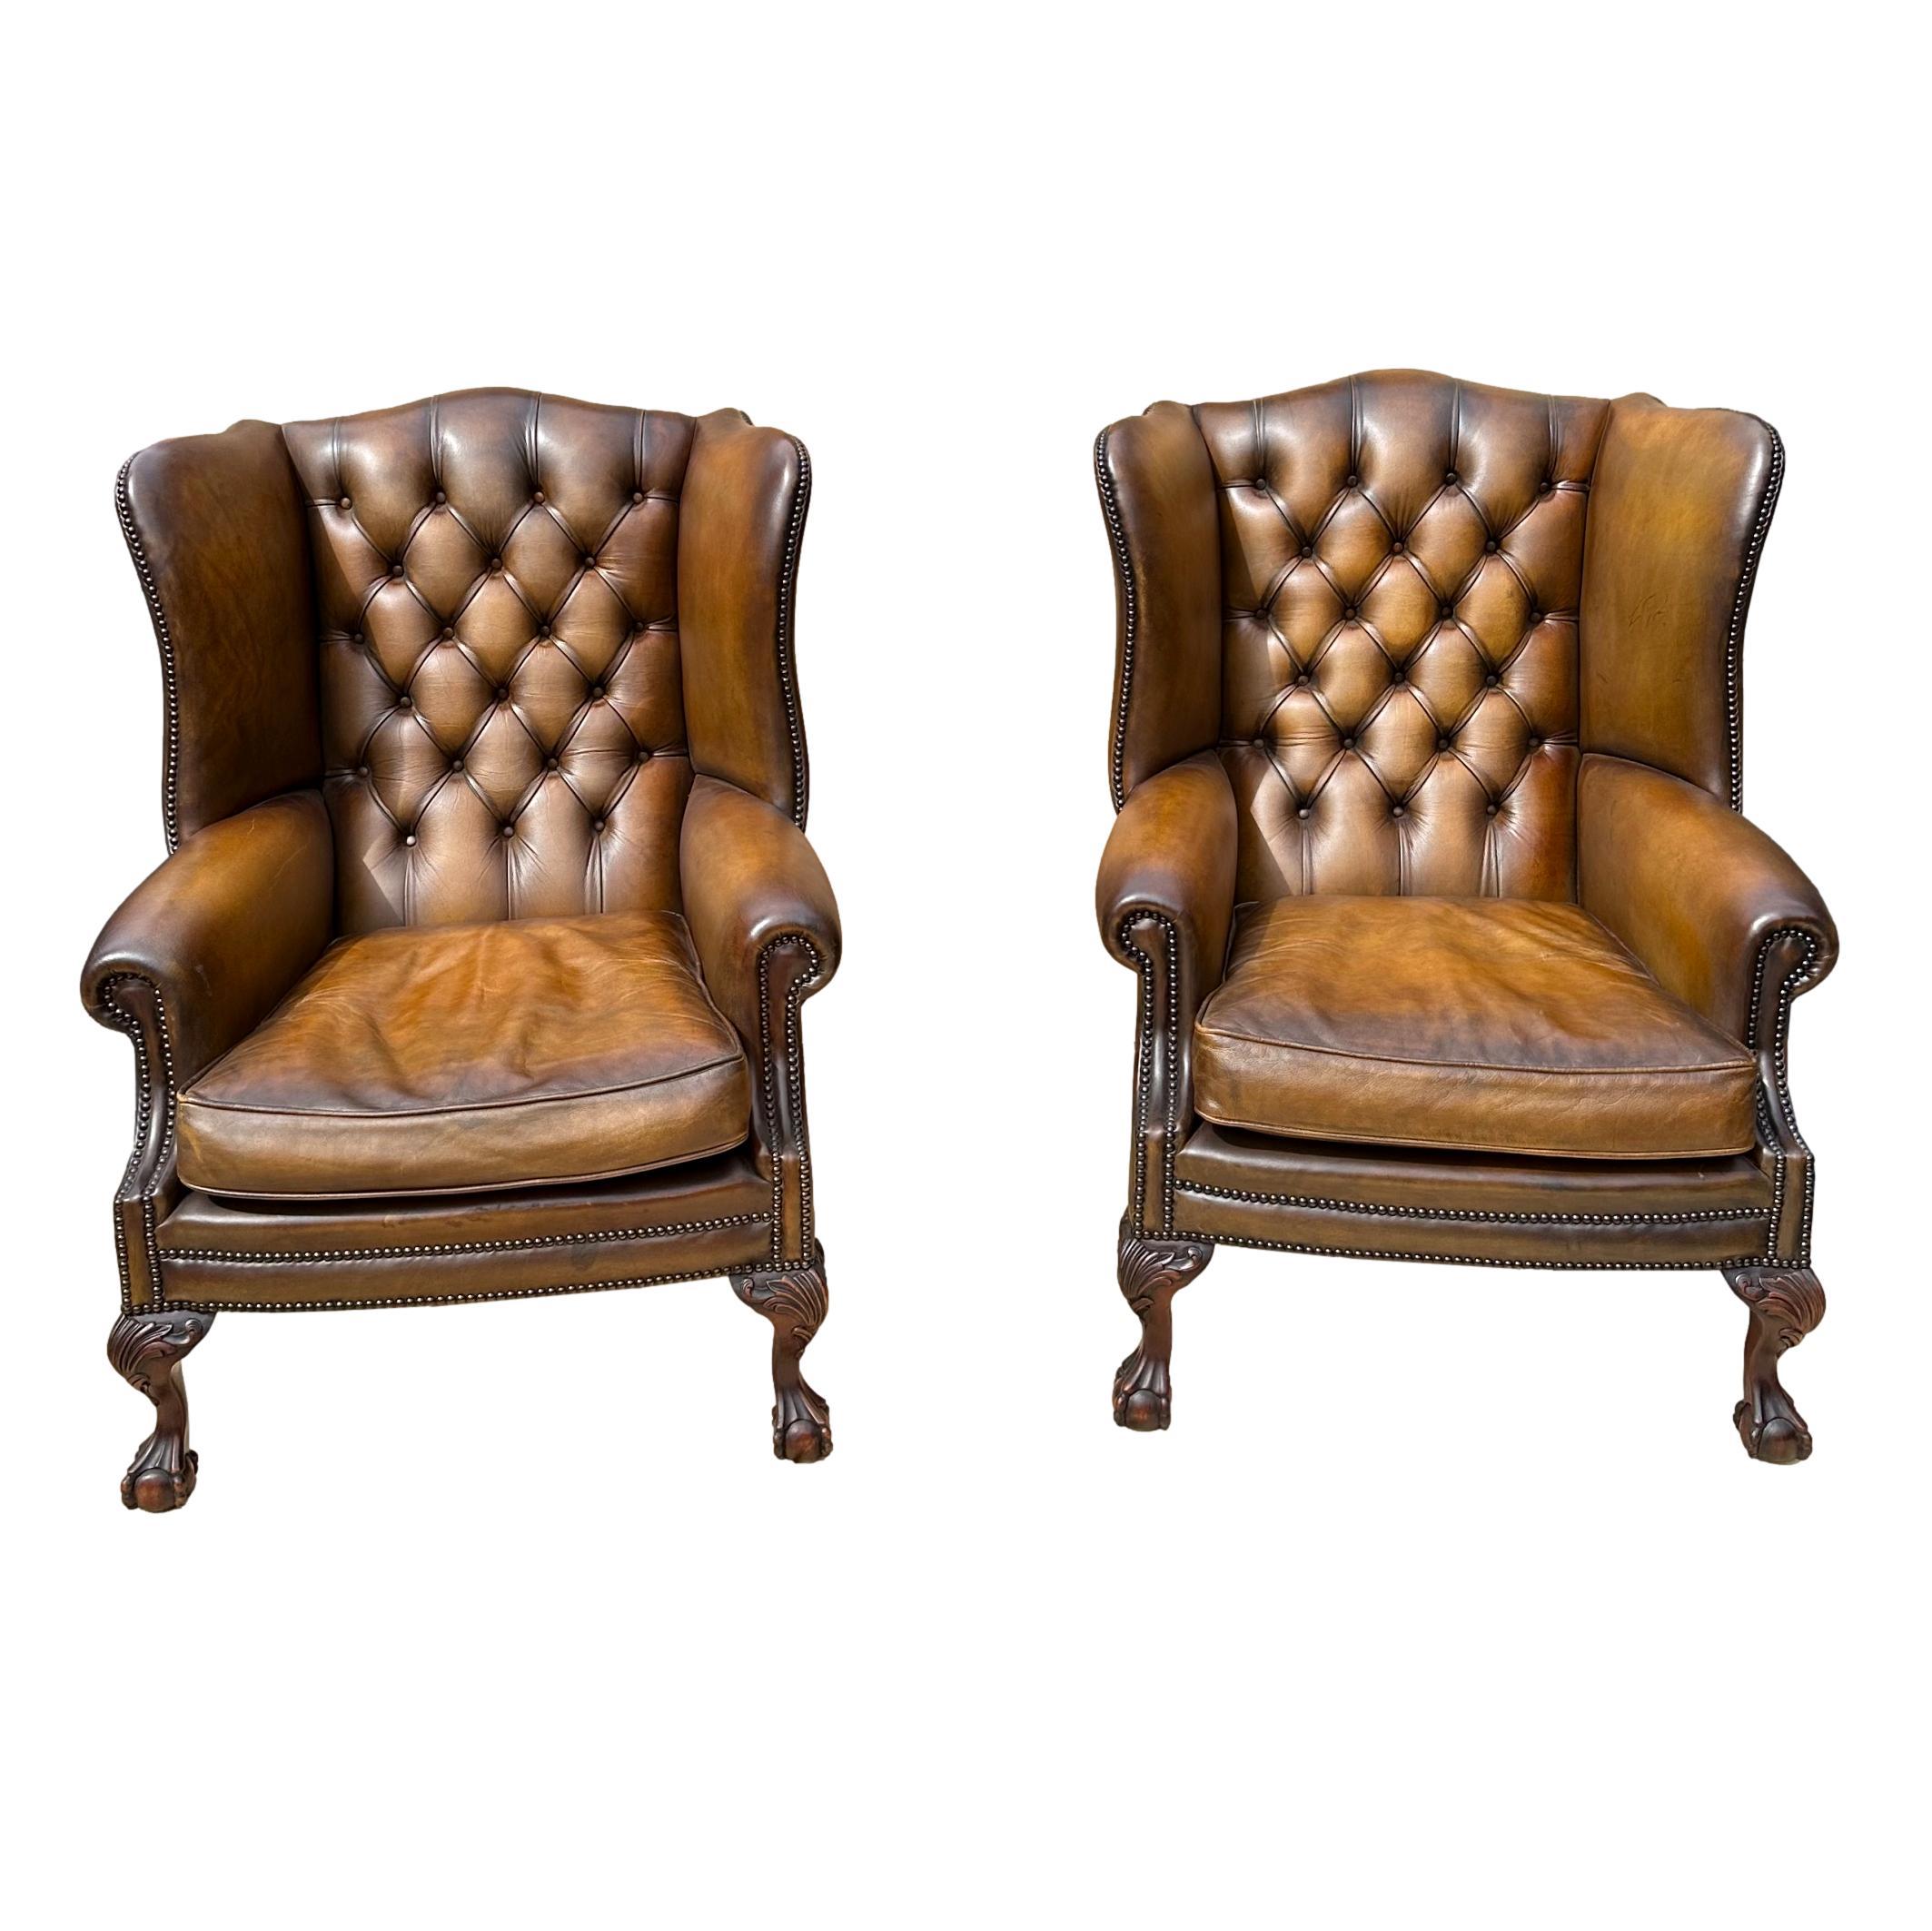 A pair of Edwardian Chippendale-style Leather Wingback Chairs, shaped and slanted, with hand-tied button tufting, trimmed in brass nail heads, ball and claw hand-carved legs, and rear cabriole legs, English, ca. 1920. 
The seat cushions are newly